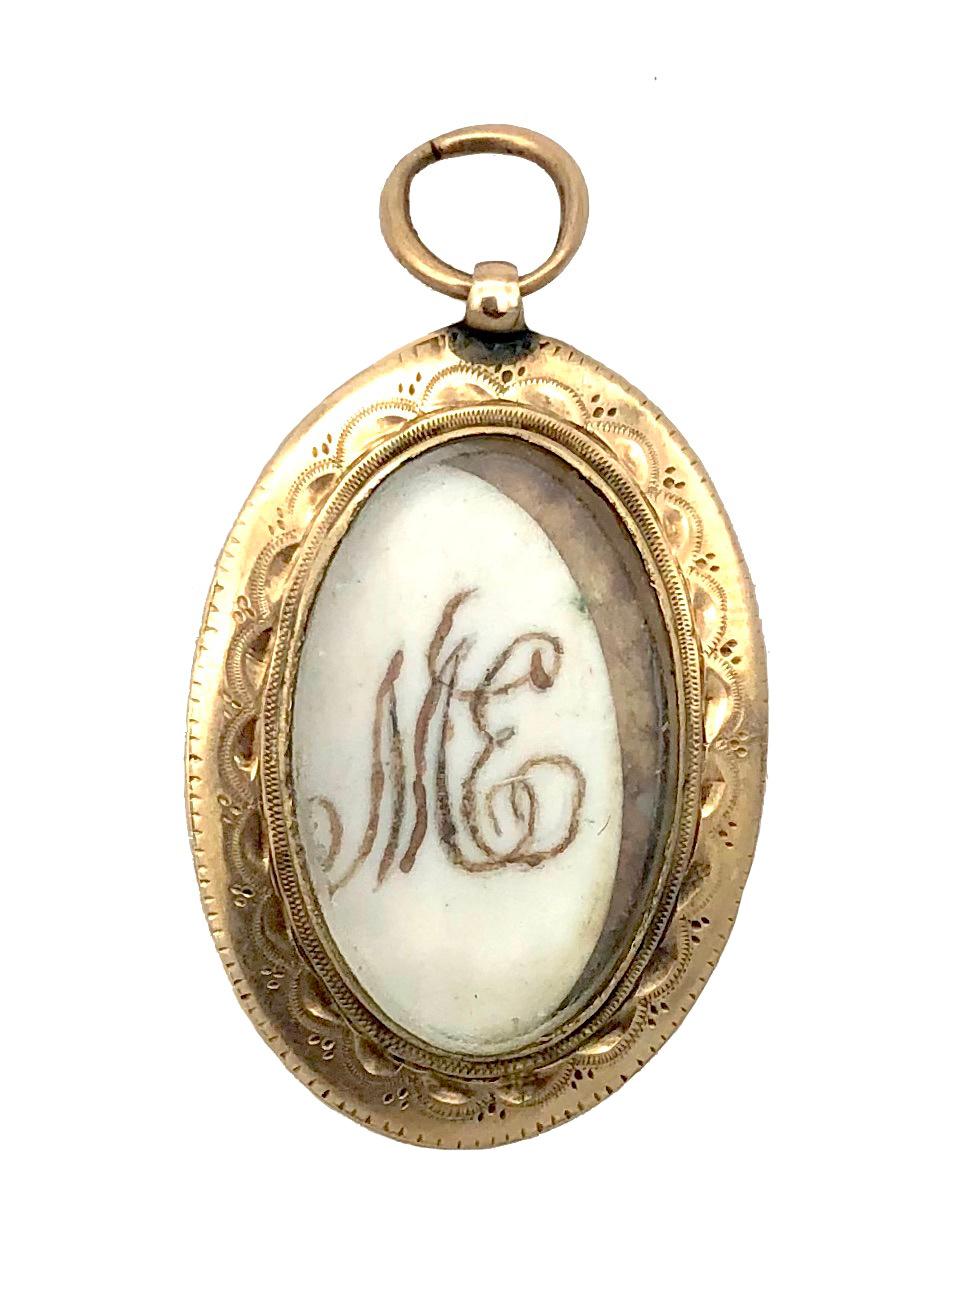 This fine quality Georgian pendant locket has been handcrafted out of 15 karat gold. Within a yellow gold double frame the front of the locket has been painted with bright red translucent enamel over a golden surface covered with an intricate